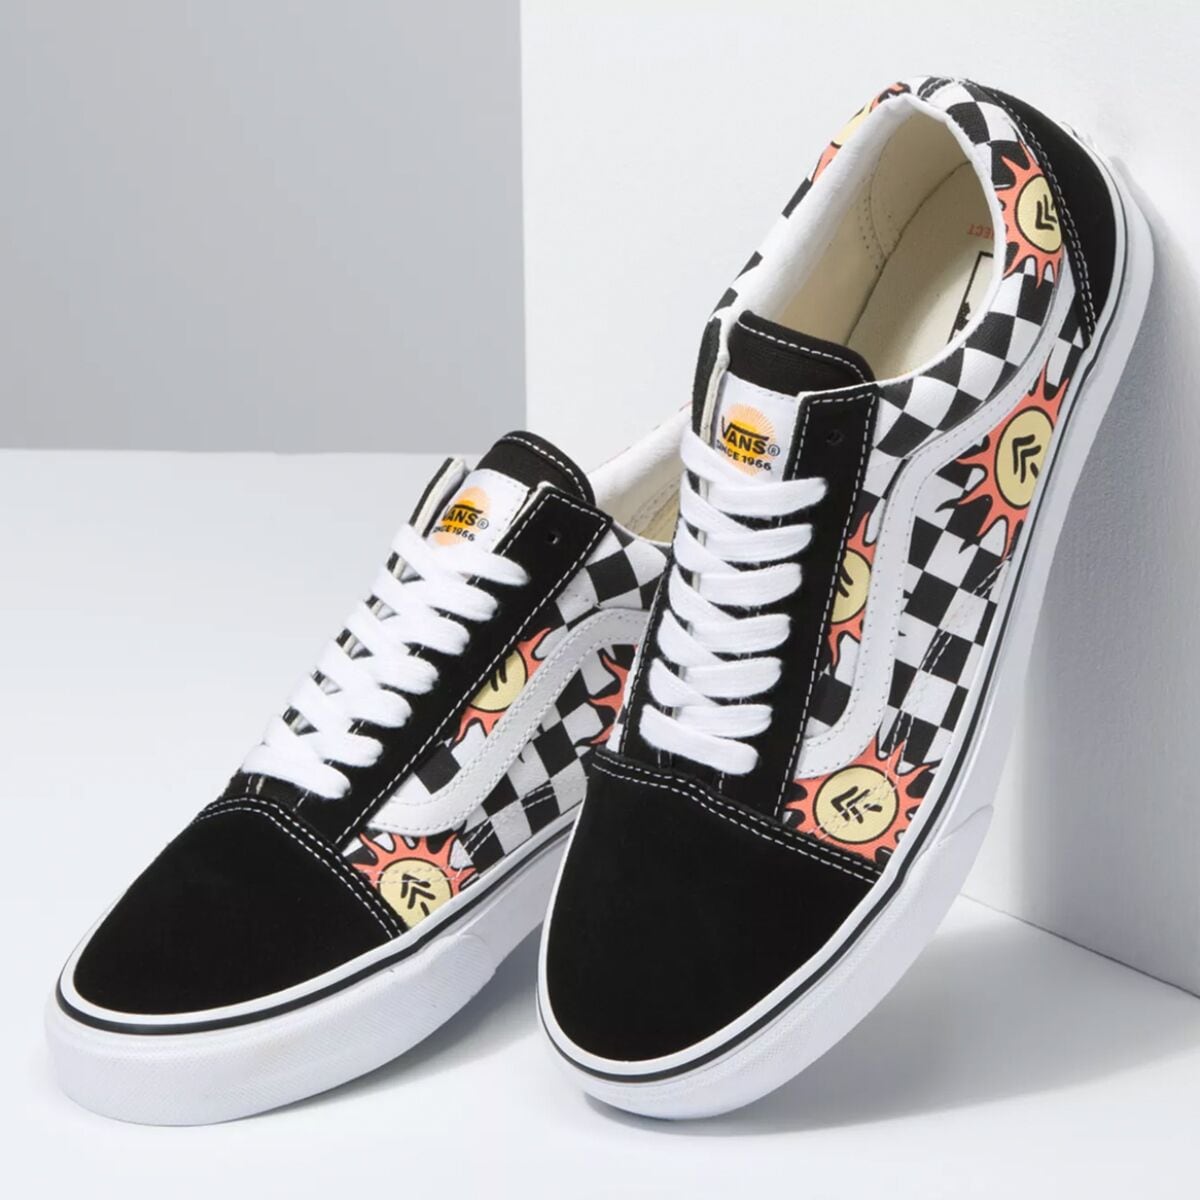 Vans Old Skool X Parks Project Capsule Collection Checkerboard Ships FAST!